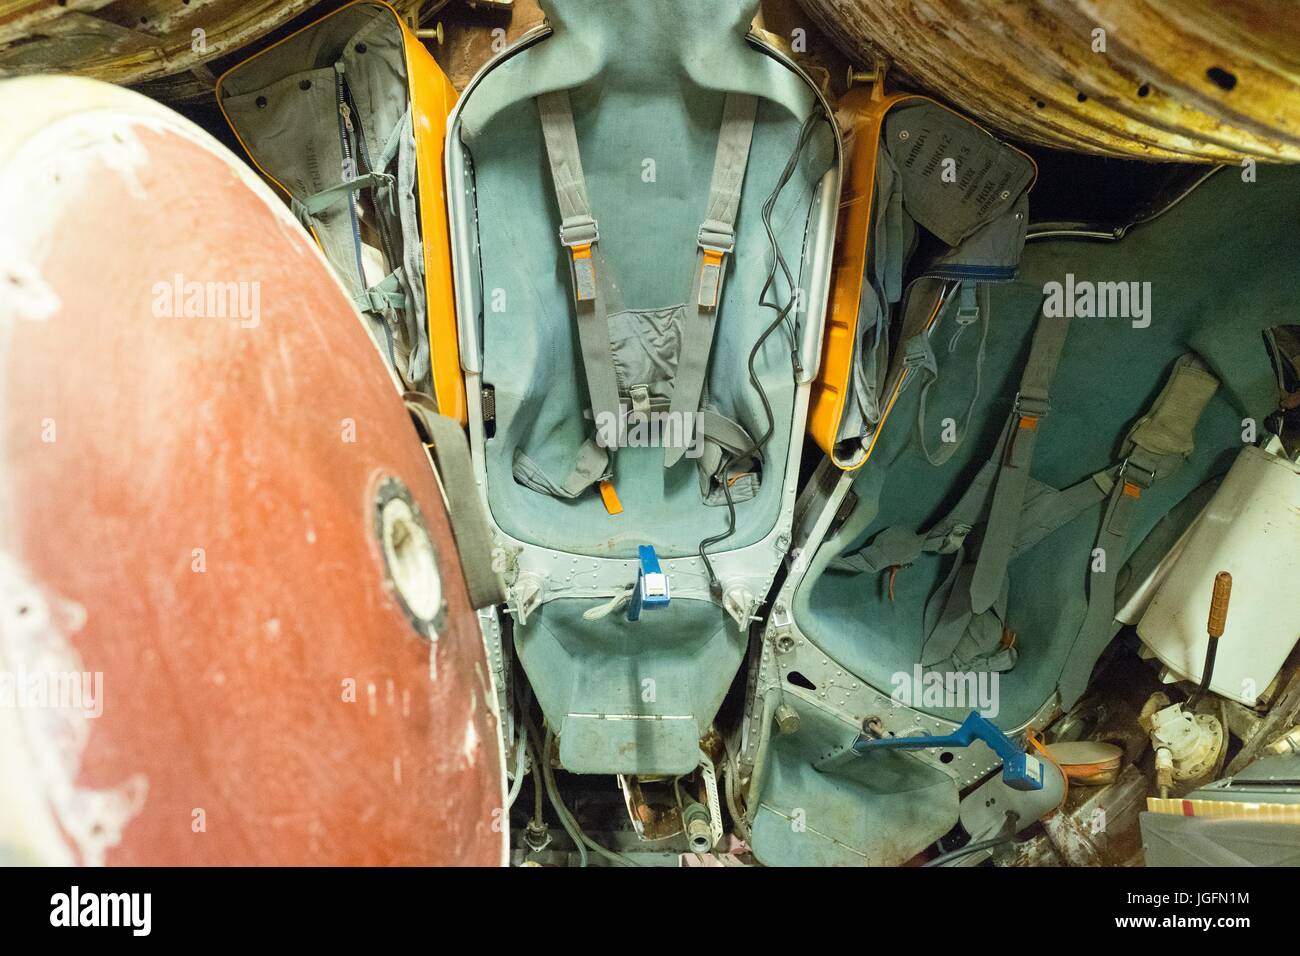 Interior of a Russian Soyuz space capsule, with astronaut seats, hatch and controls visible, June 15, 2017. Stock Photo